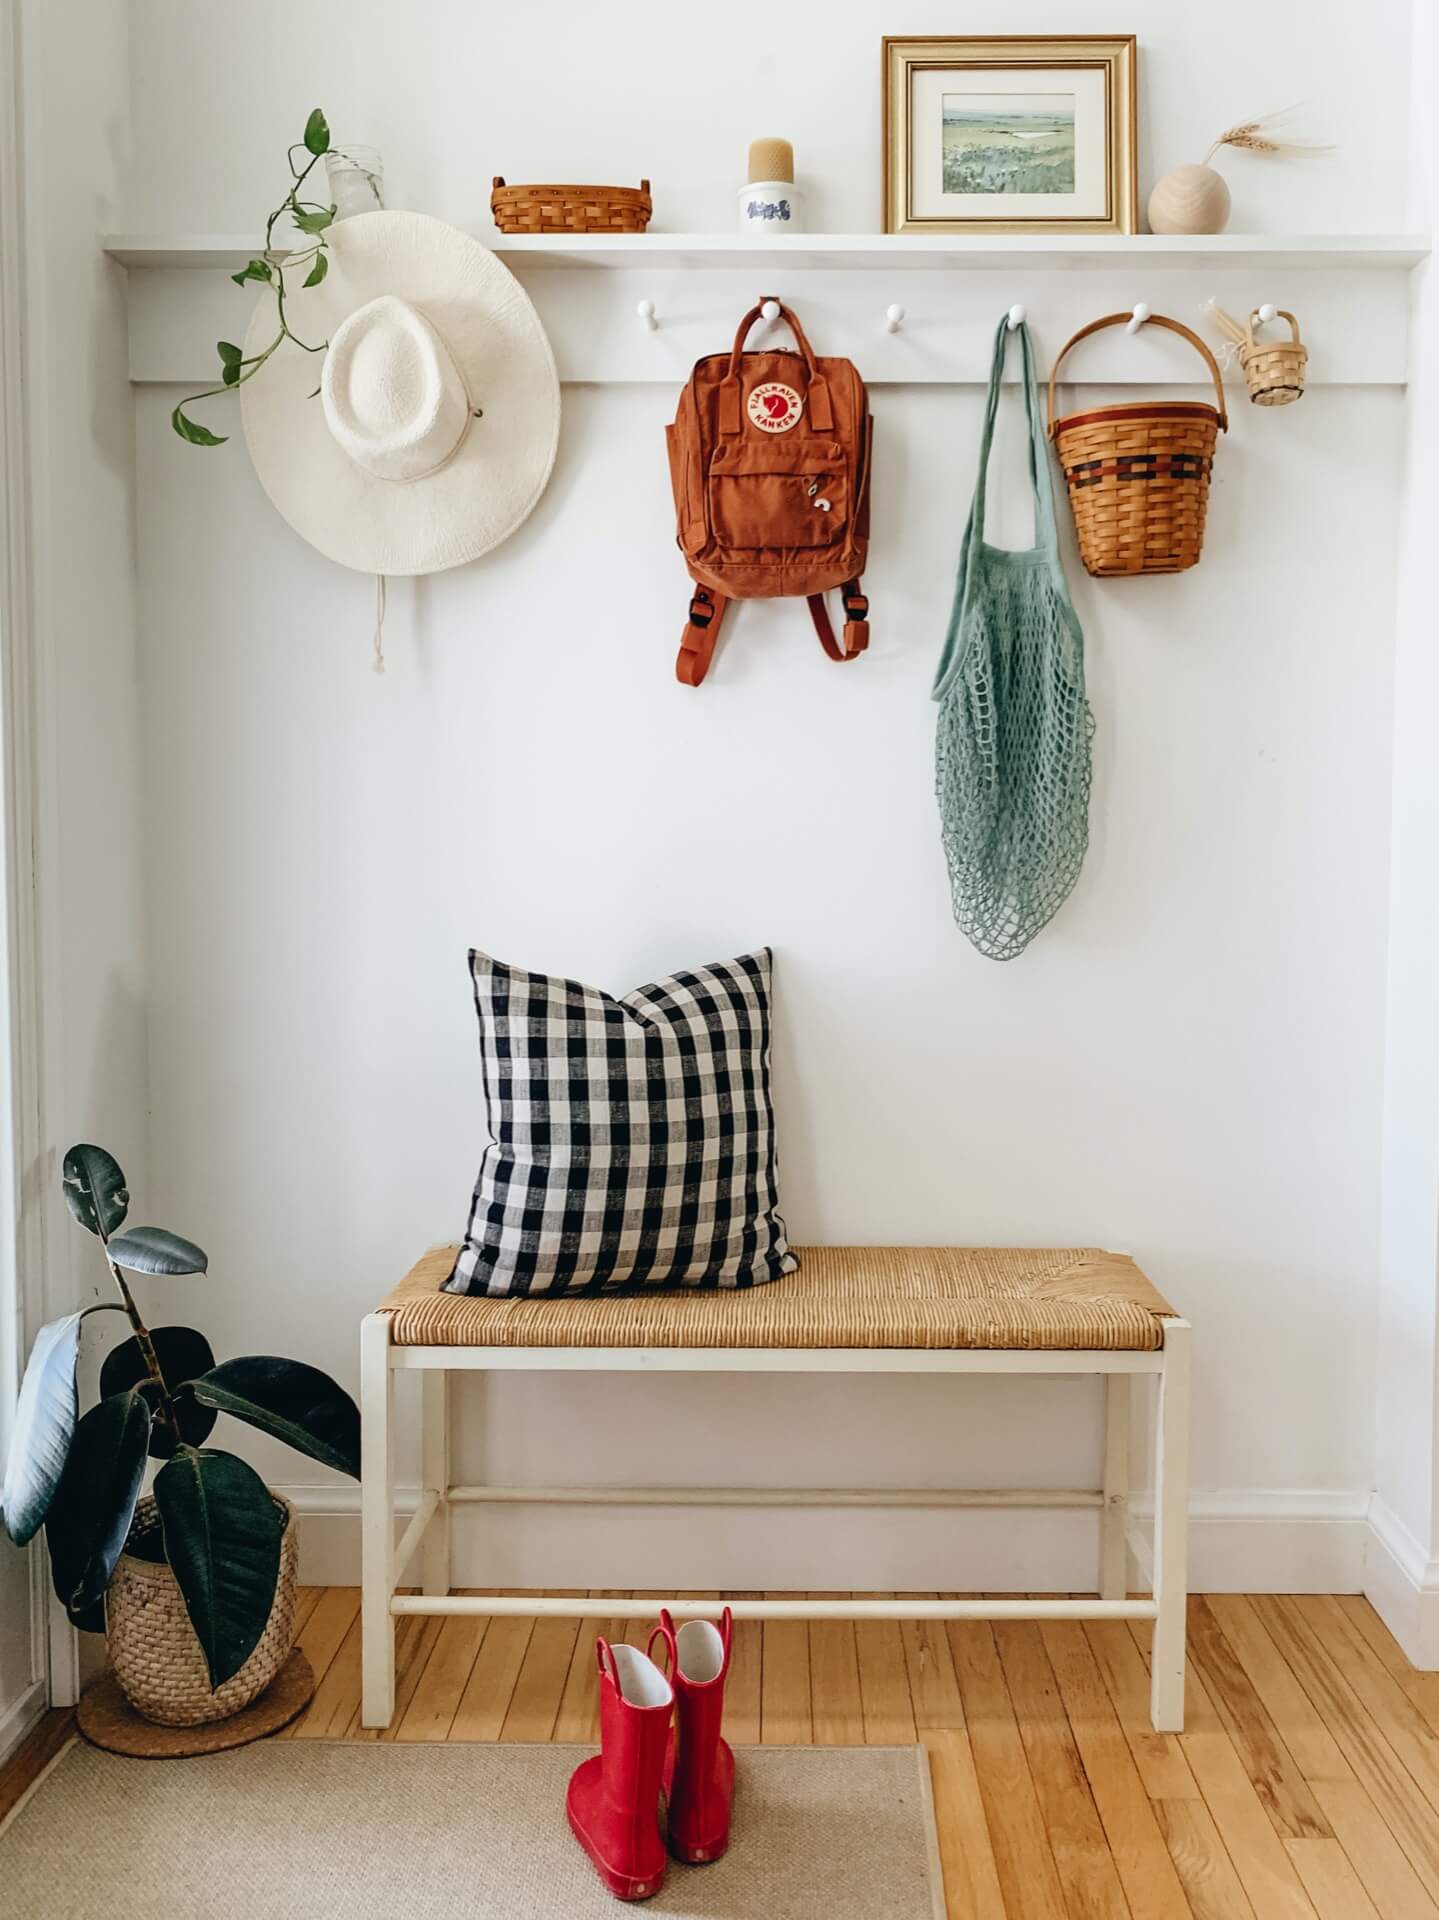 Home tour with Leah Gaeddert - peg rail and bench by the front door